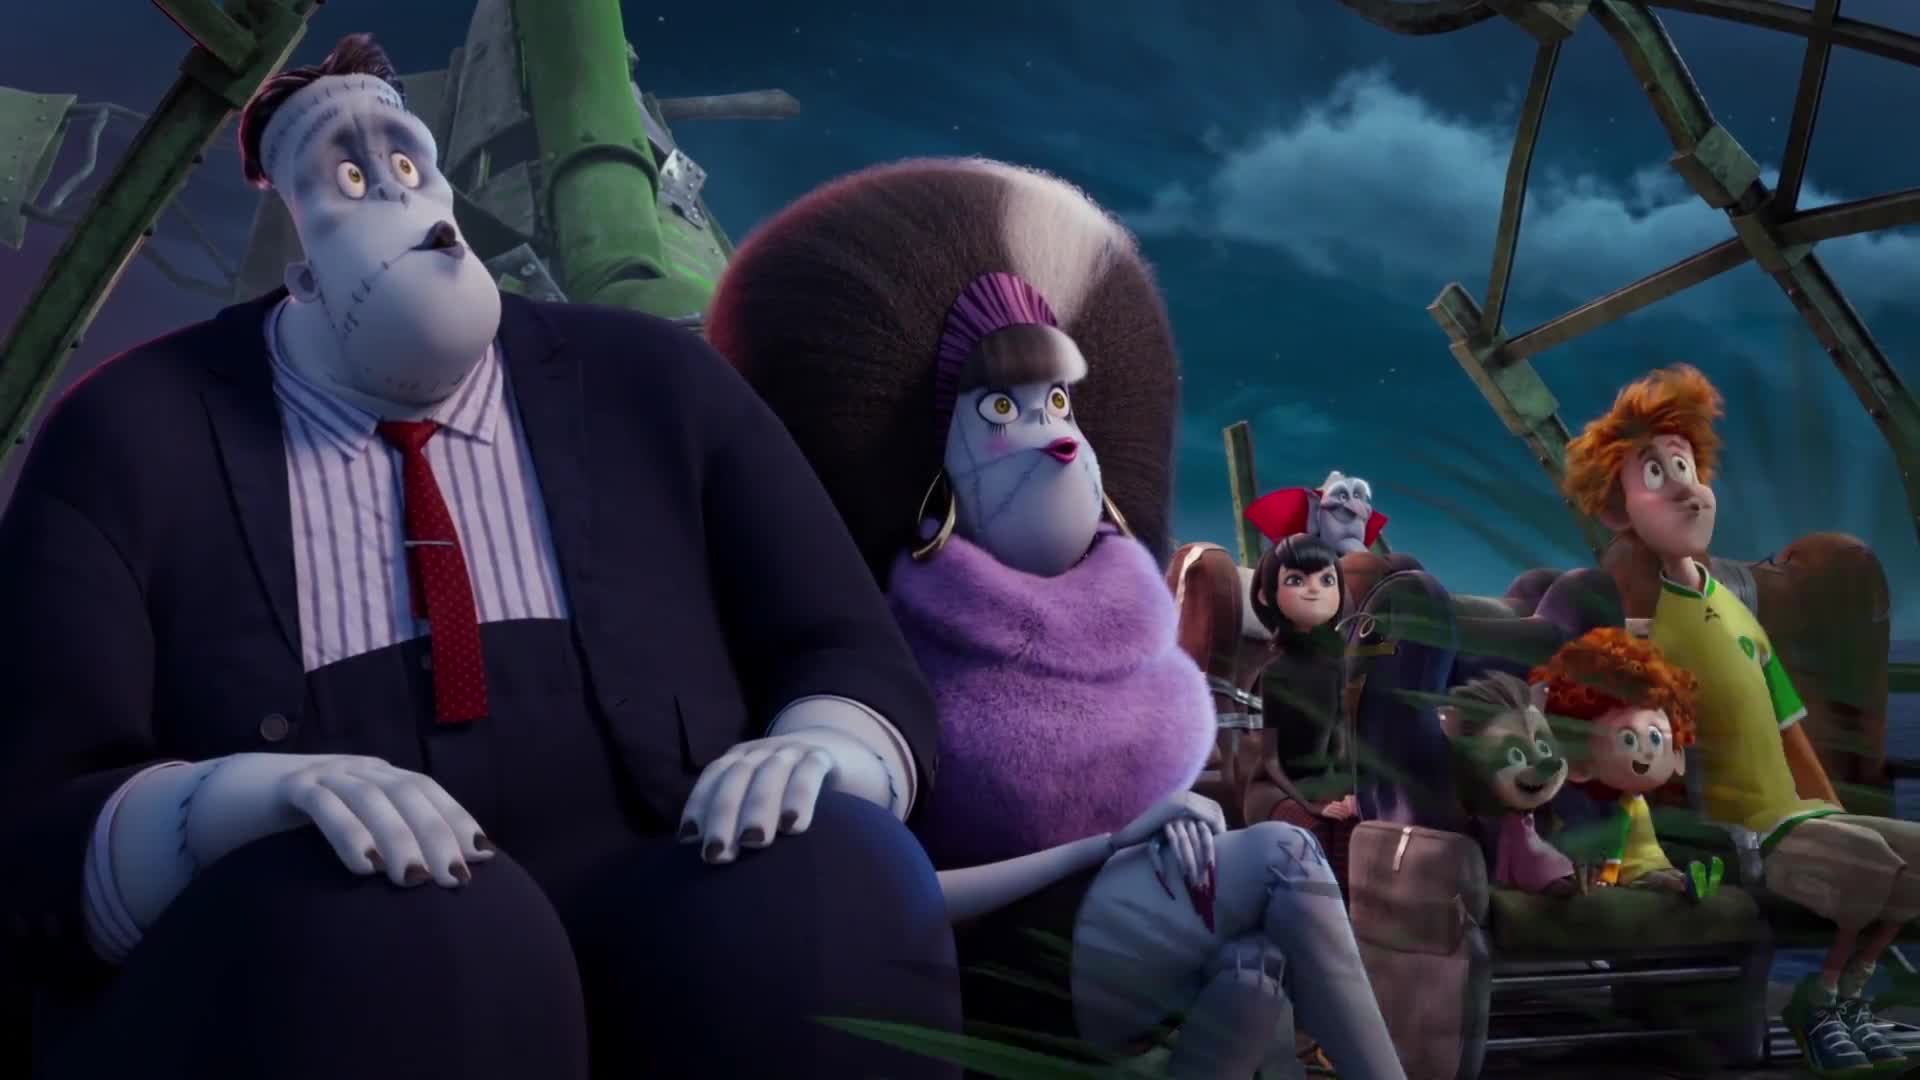 Hotel Transylvania 3: Monsters Overboard - trailer